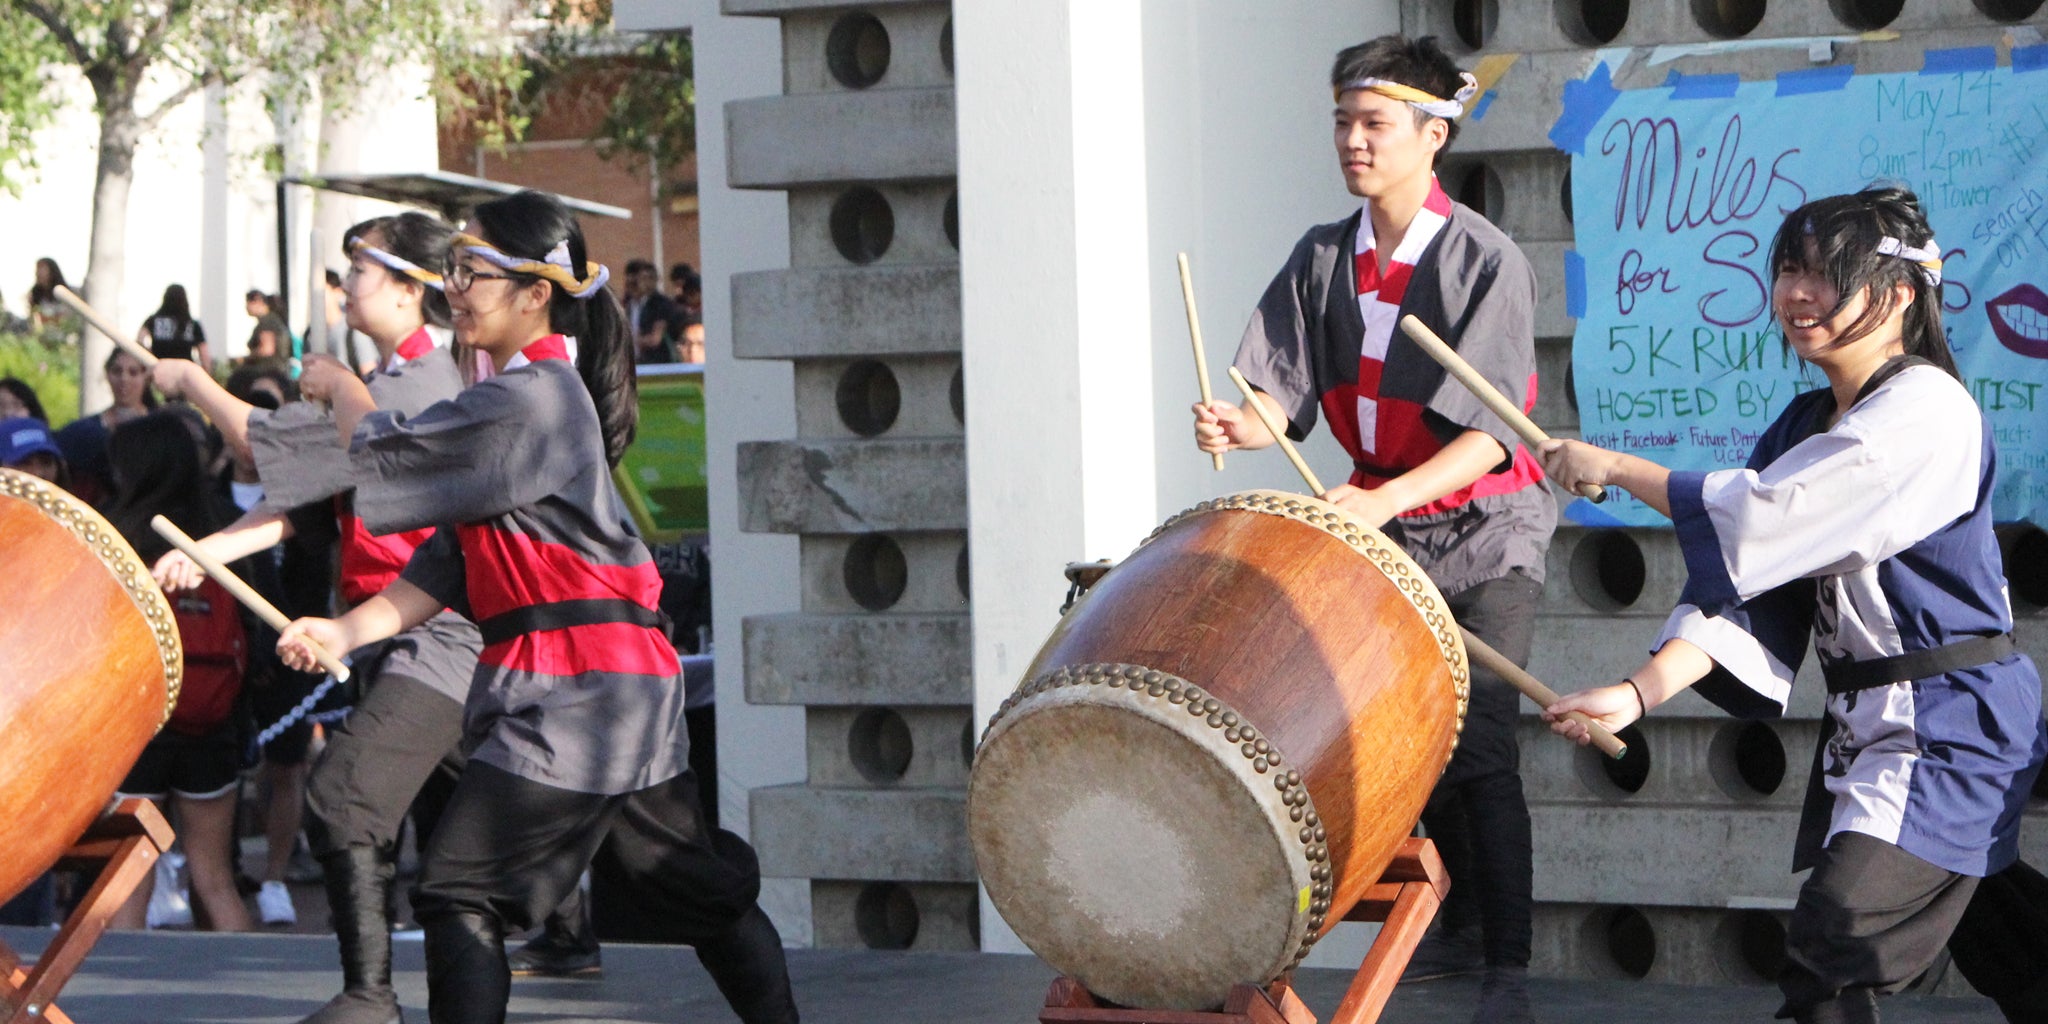 Students play taiko drums during a campus event.